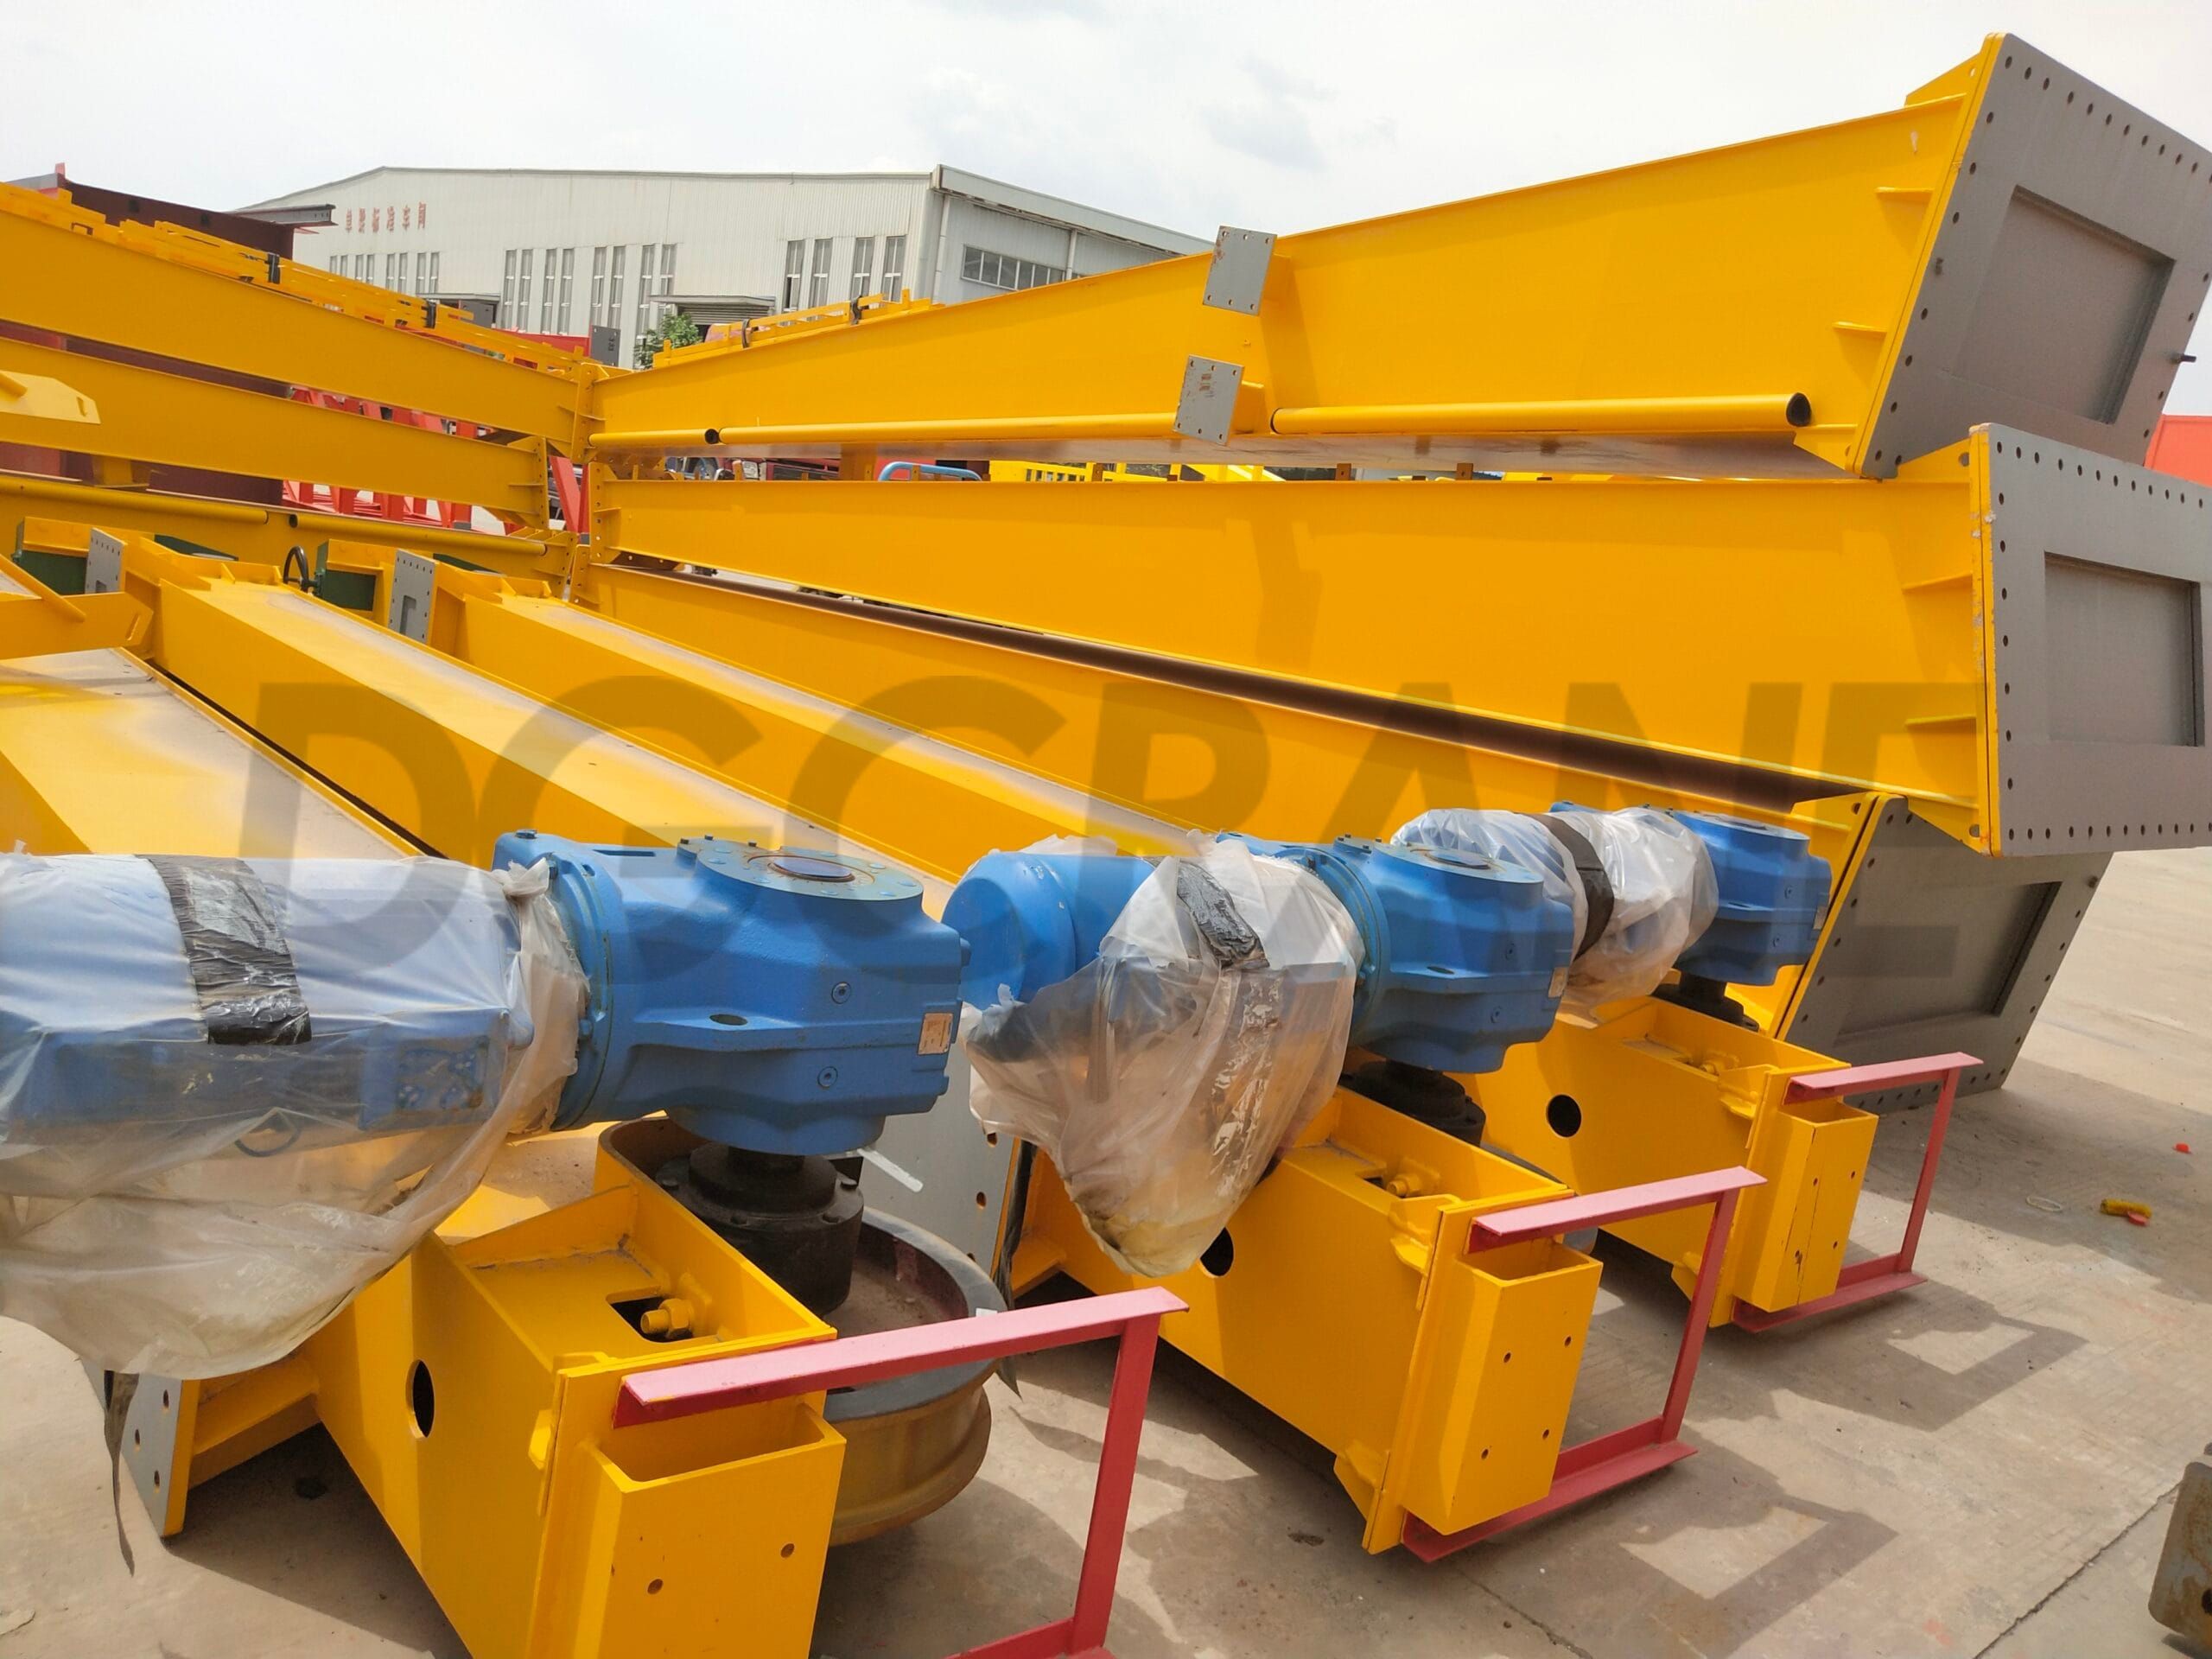 Ground beams and Support legs of double girder gantry crane